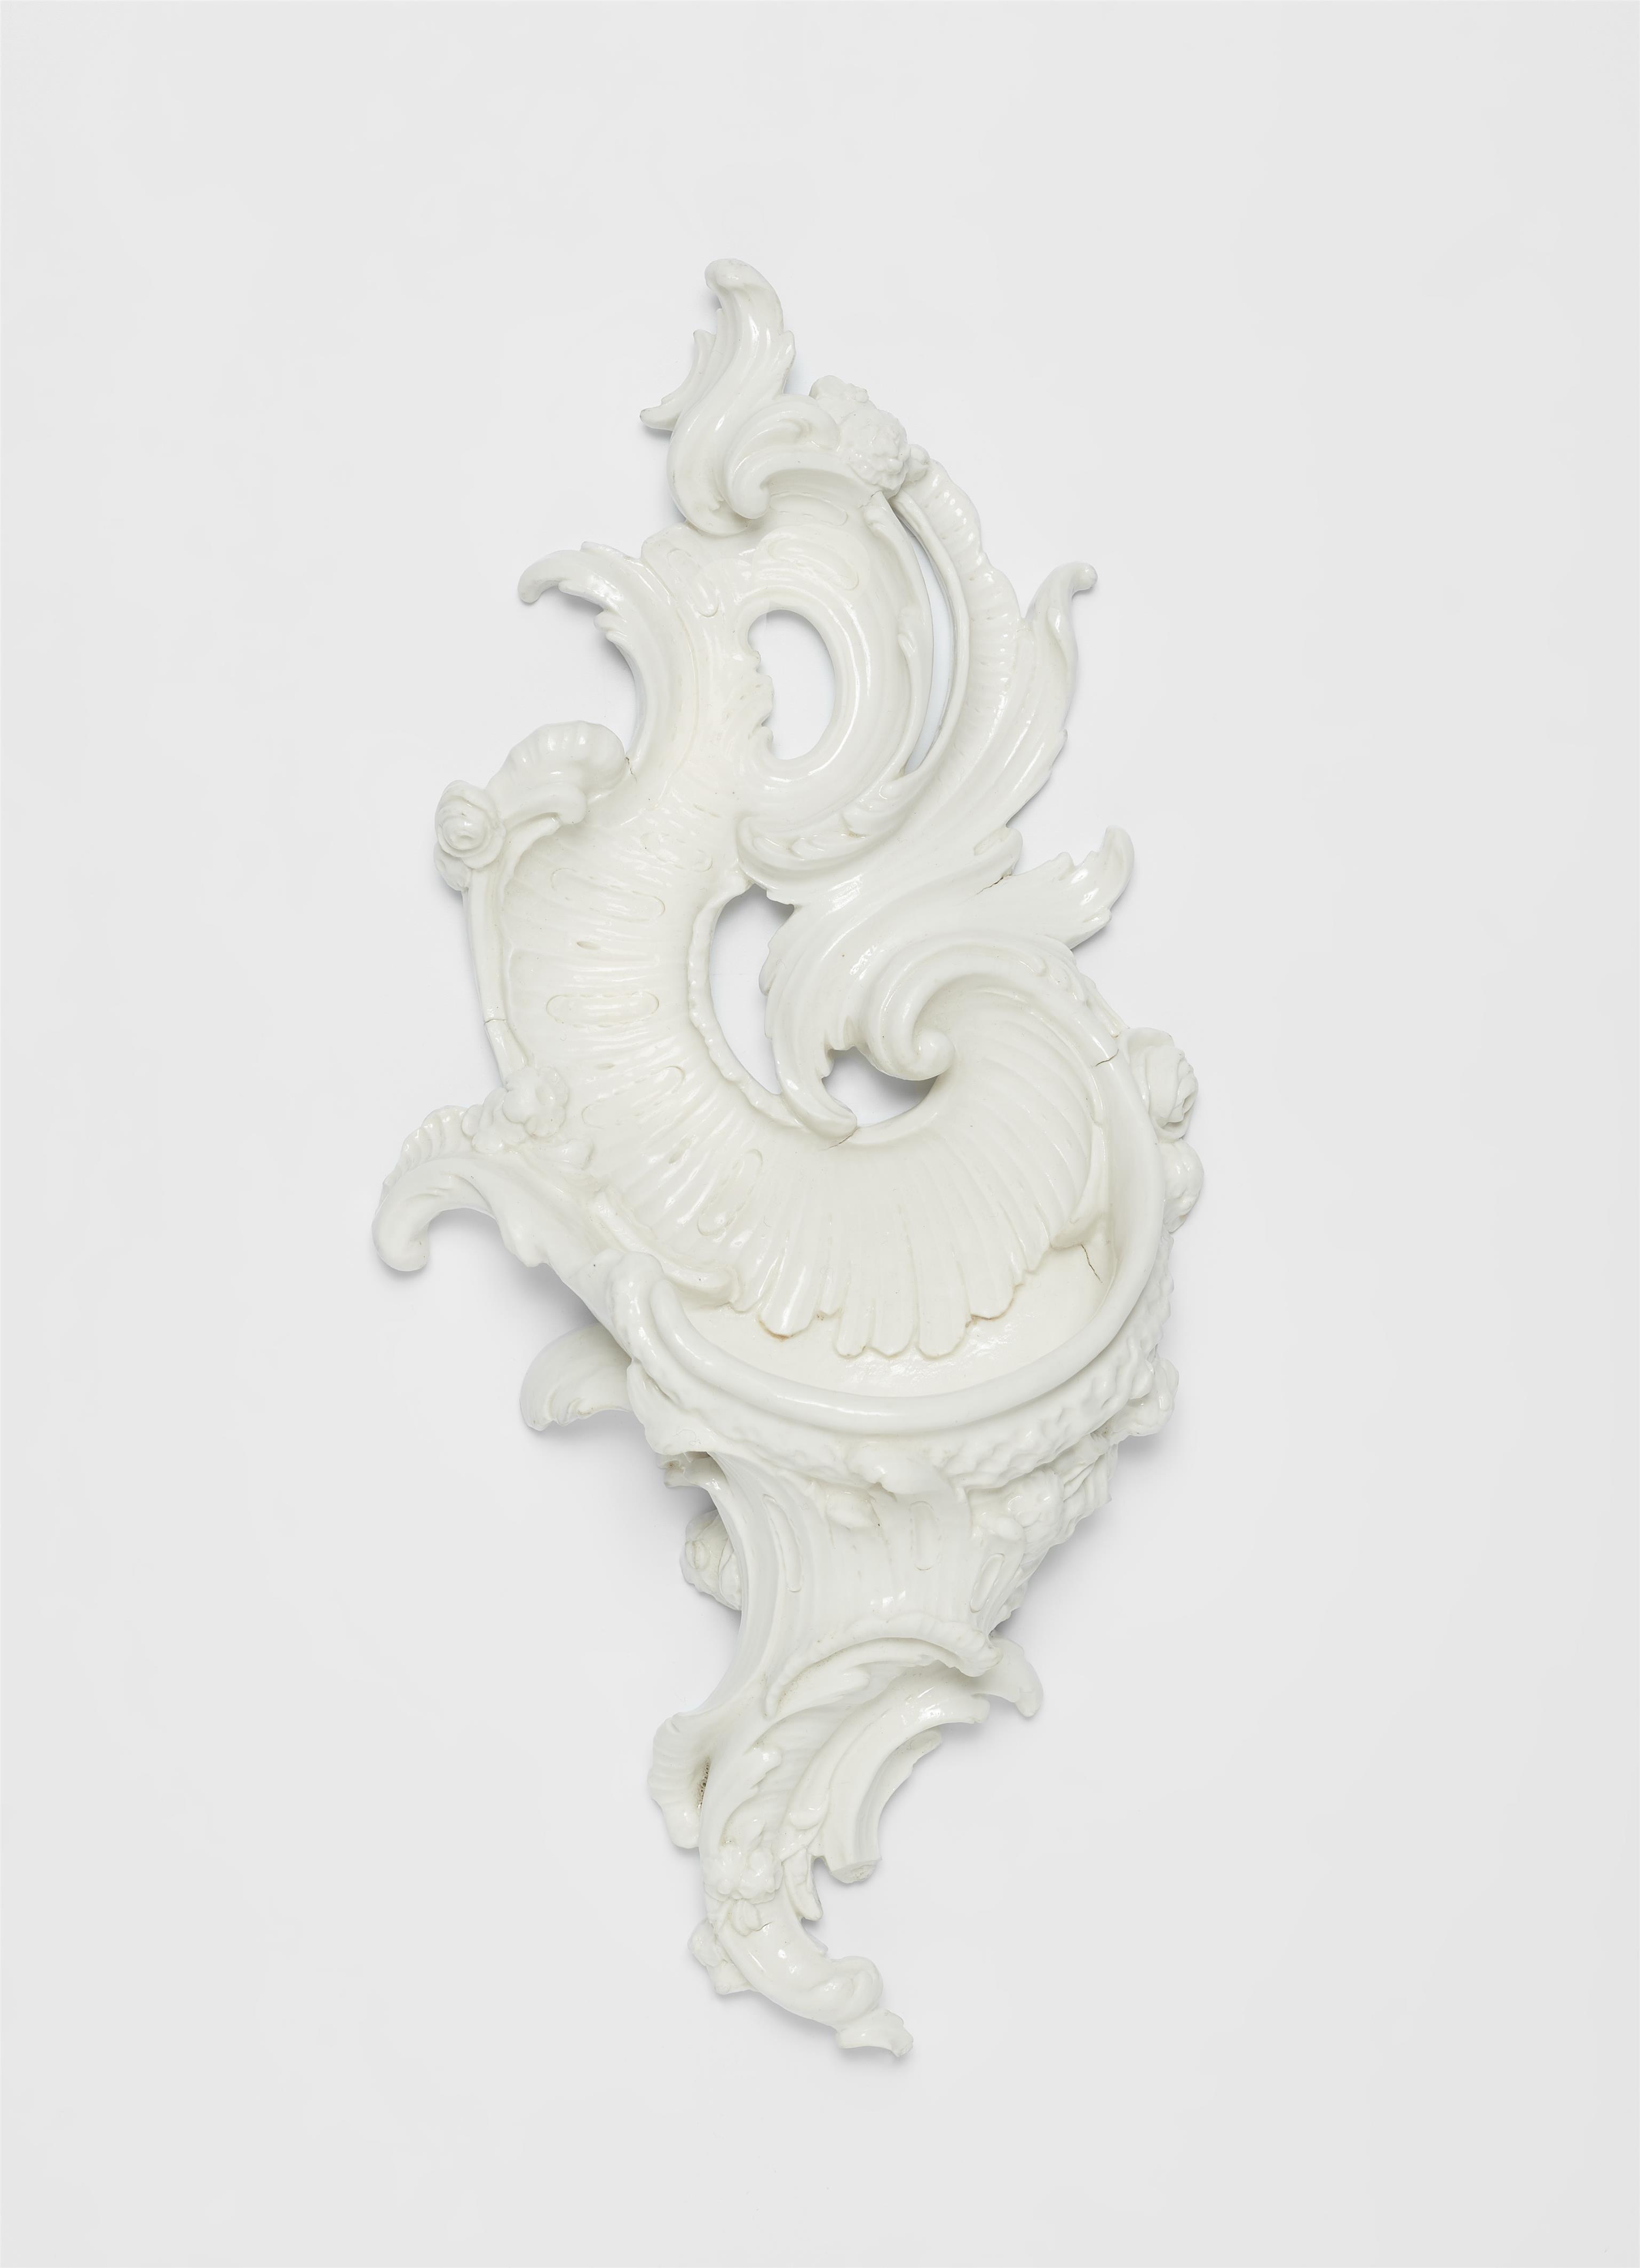 A Nymphenburg porcelain holy water stoop - image-1